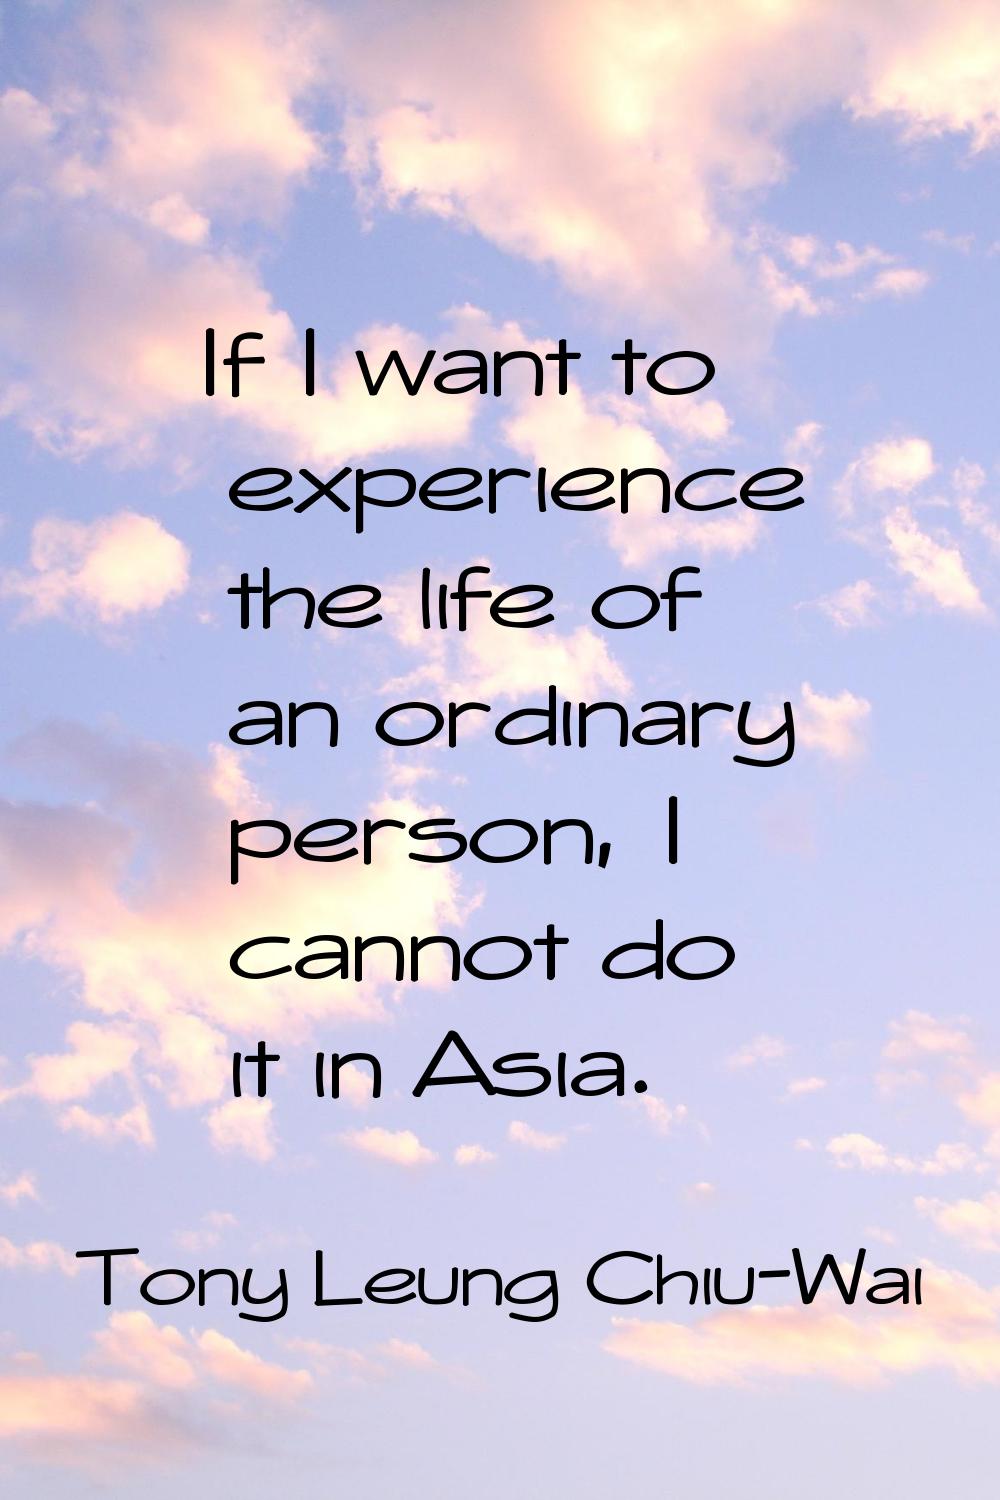 If I want to experience the life of an ordinary person, I cannot do it in Asia.